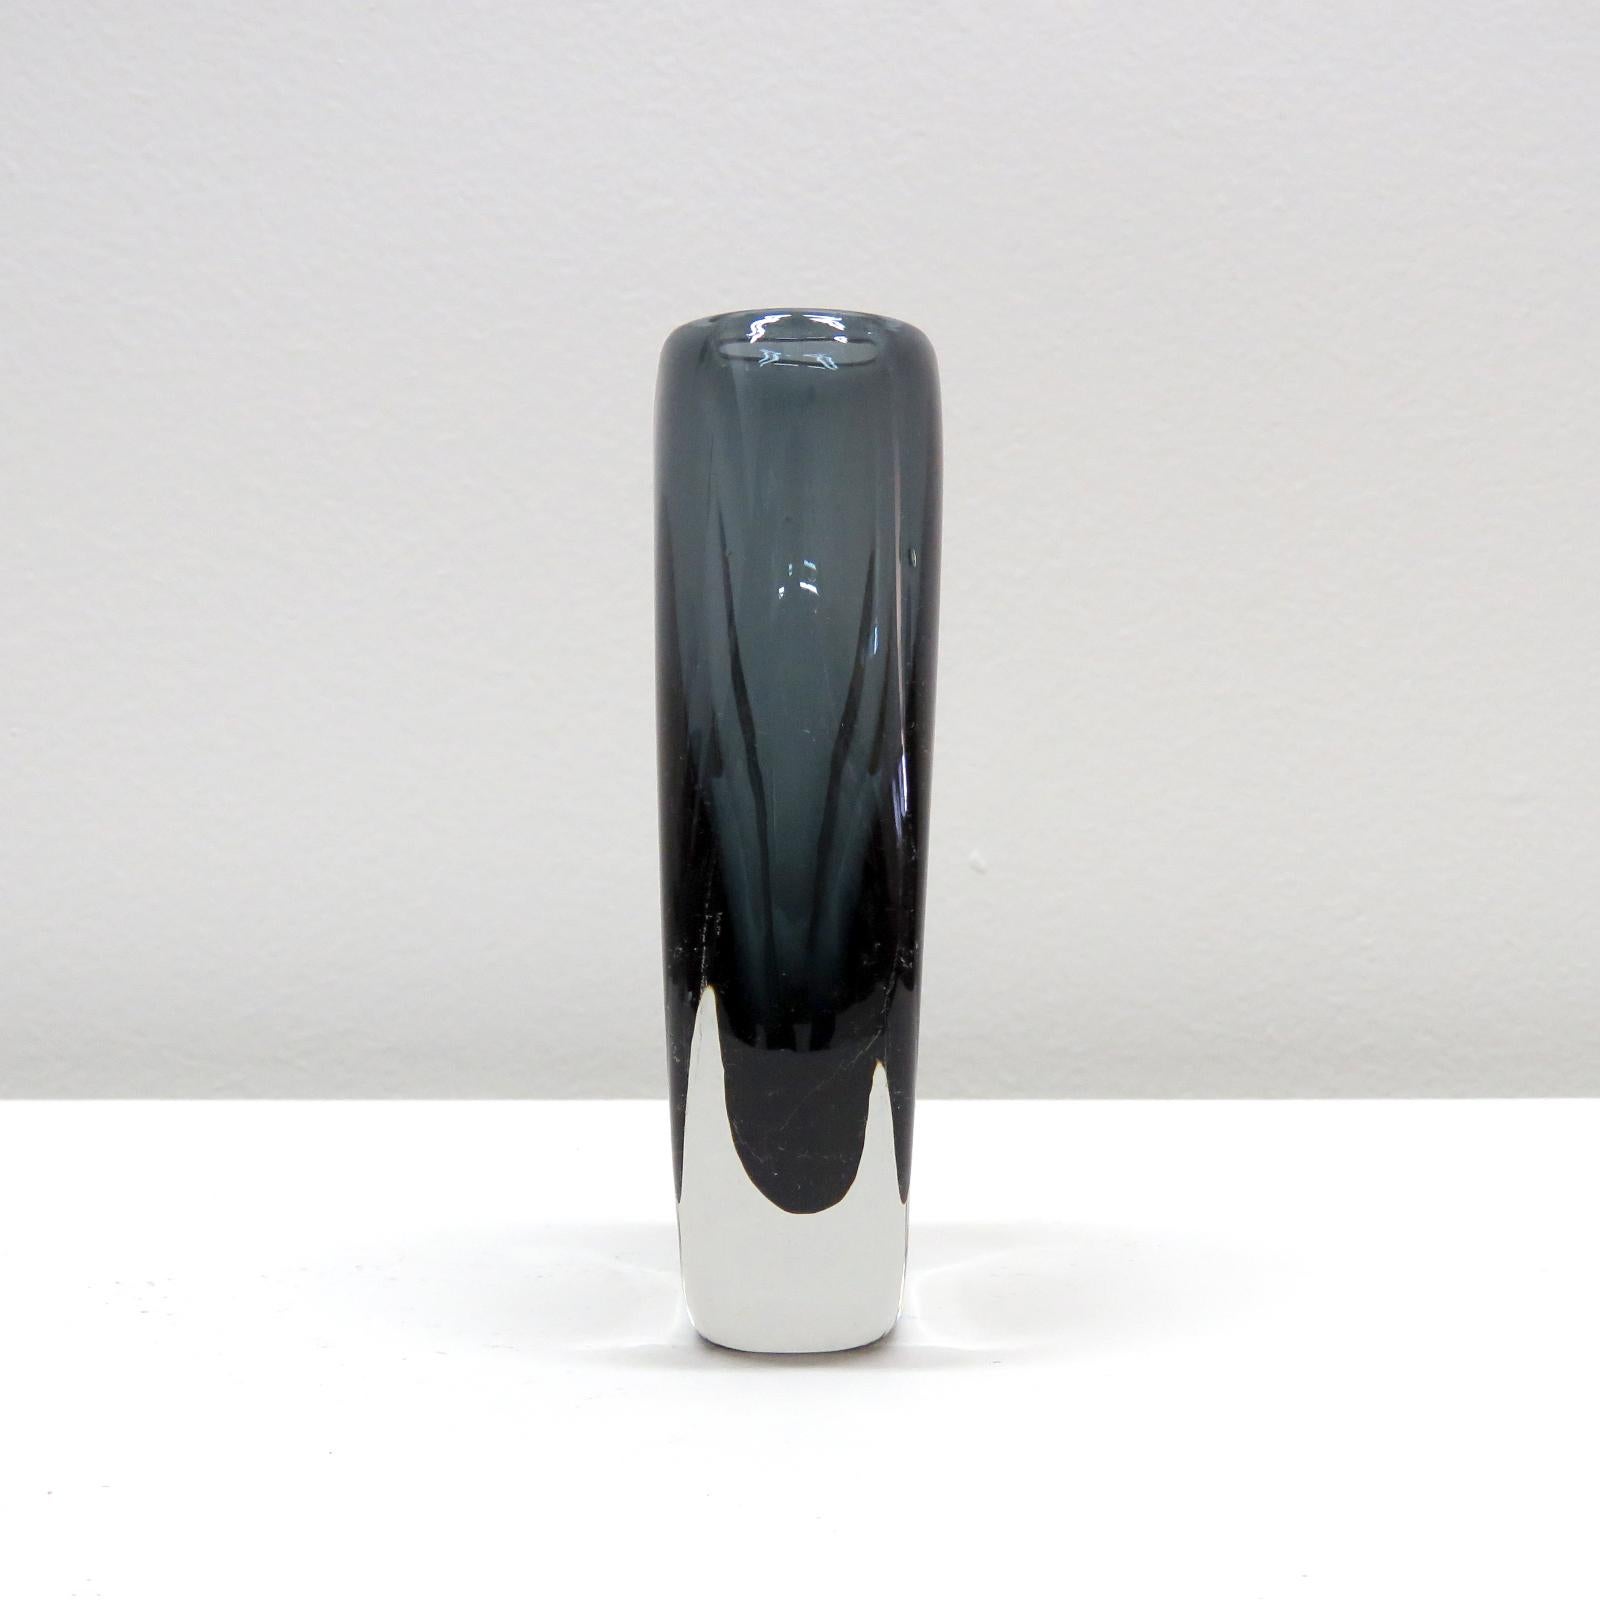 Stunning handblown, art glass 'Sommerso' vase designed by Nils Landberg and produced by Orrefors, Sweden, 1960s in blue-grey hues.